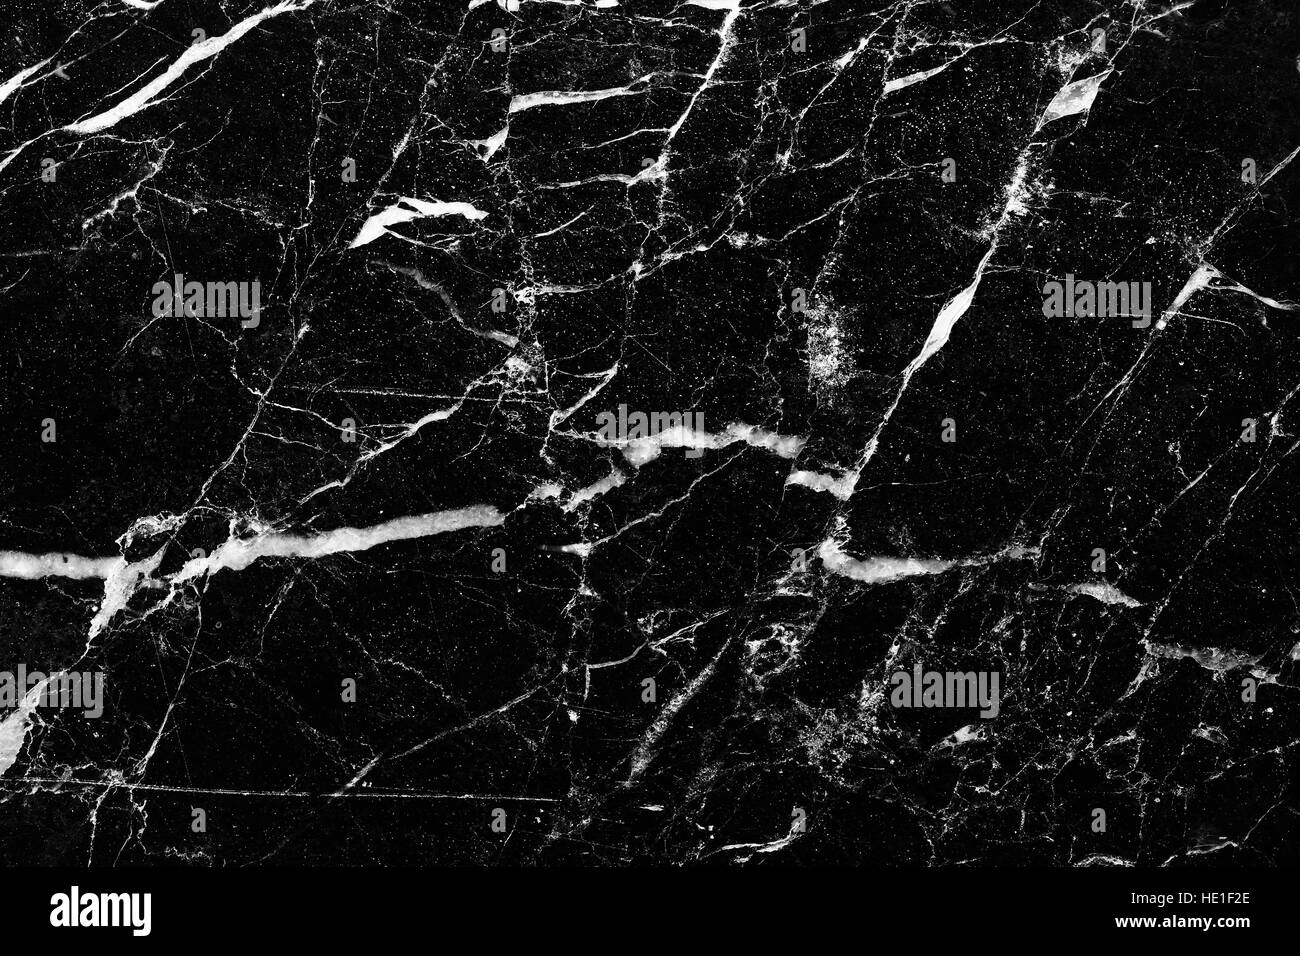 White patterned natural of black and white marble texture, abstract backgroud. Stock Photo